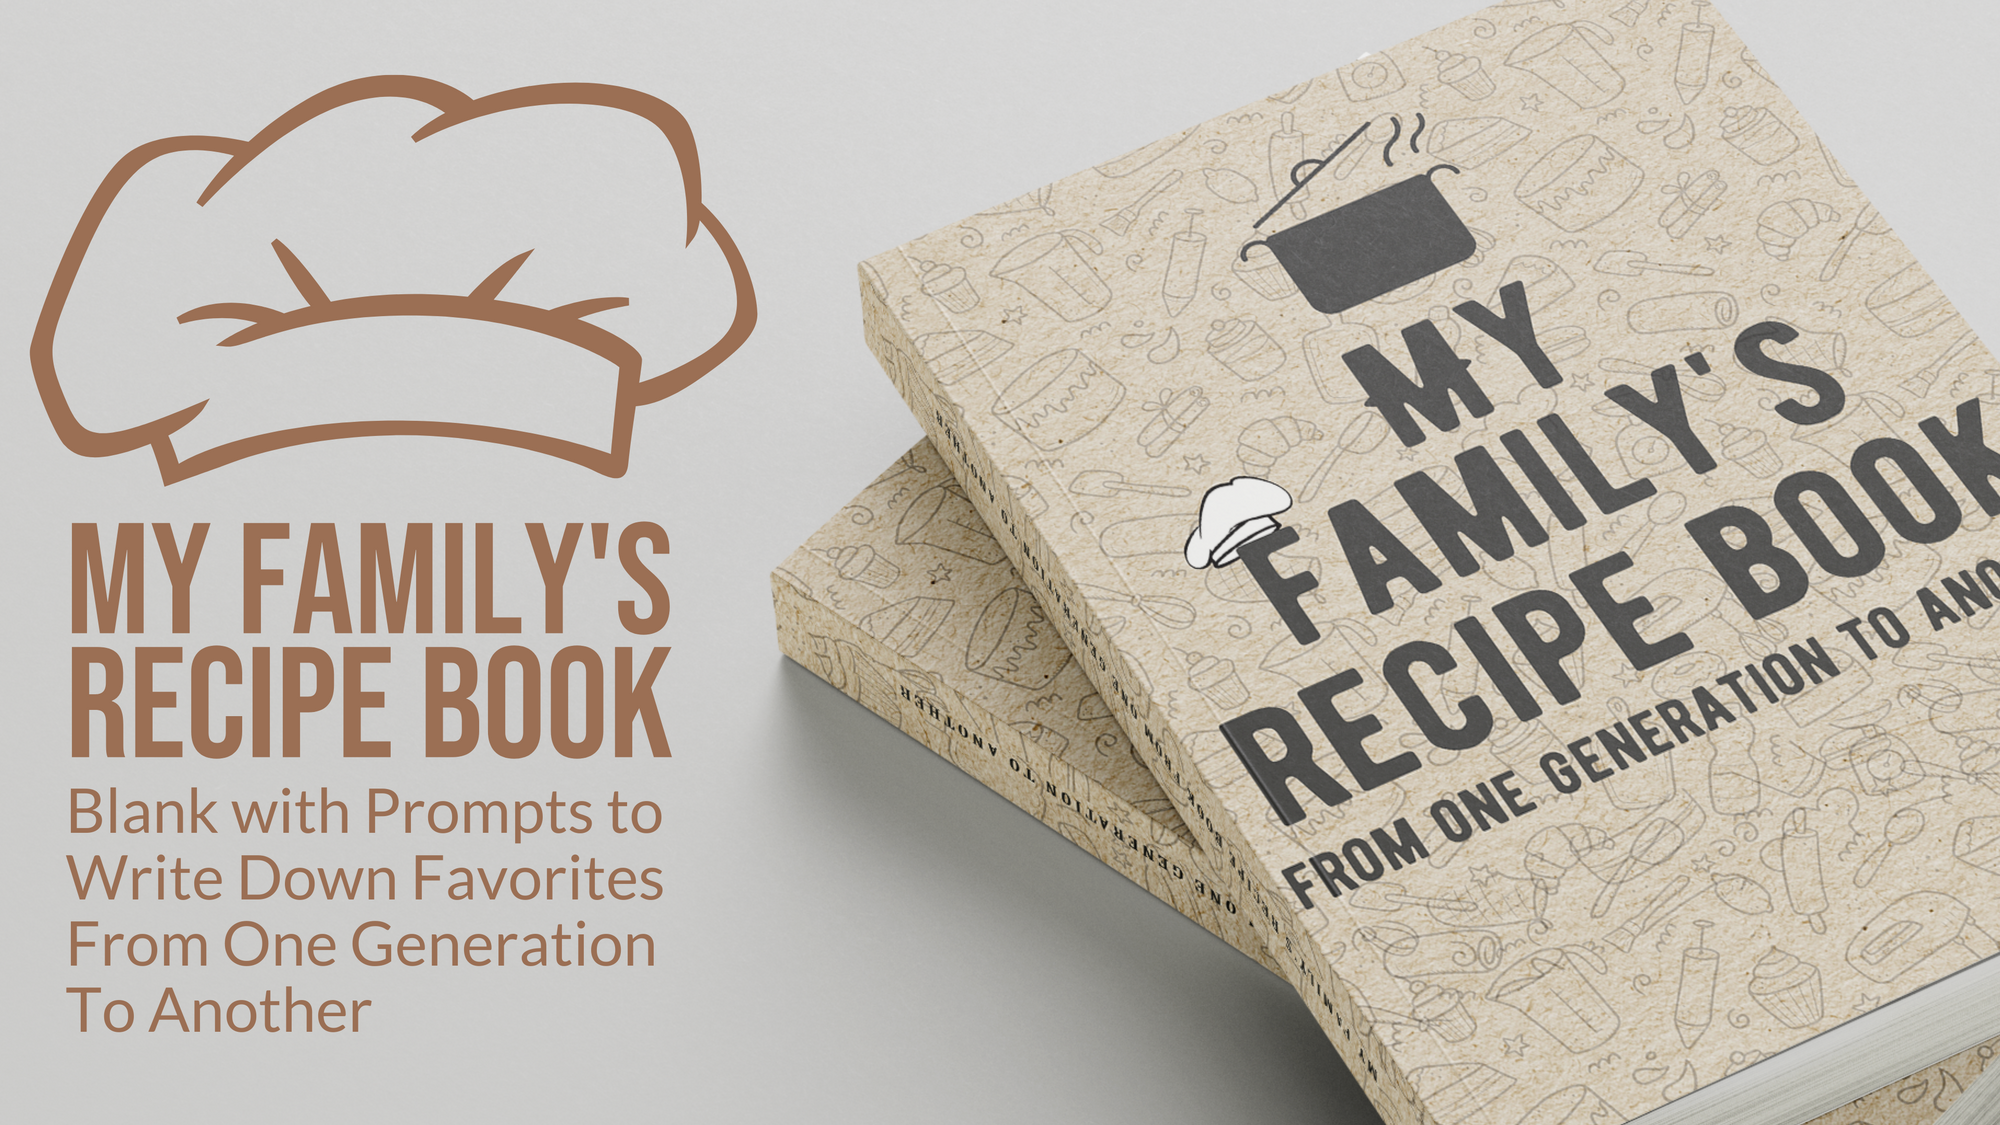 Blank Recipe Cookbook: Blank Recipe Book to Write In your own Recipes, Fill in your Favorite Recipes in this Empty Cookbook